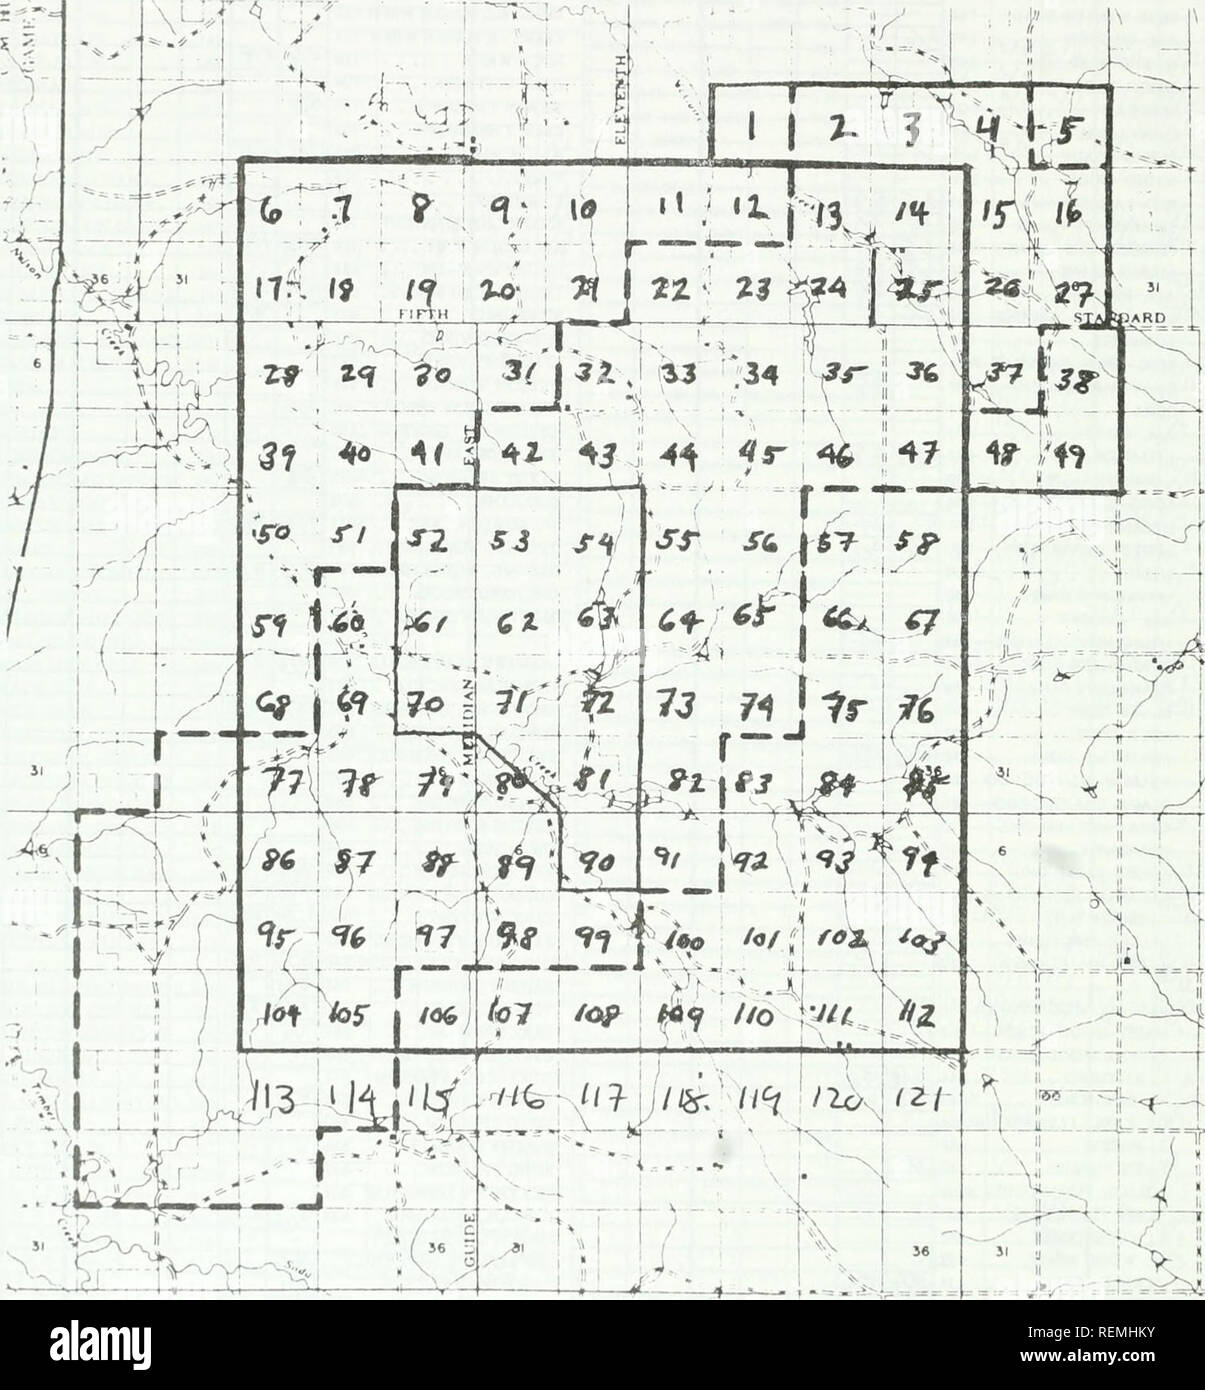 . Circle west wildlife monitoring study annual report. Zoology; Game and game-birds. Appendix D. Density indices for mule deer and pronghorn antelope by section. NOTE: Section numbers in the first column correspond to those on the following map. Columns numbered 1 through 6 indicate, for each section, (1) mule deer 1981-82 winter density; (2) mule deer six-year winter density (1976-1982); (3) pronghorn 1981-82 winter density; (4) pronghorn six-year winter density (1976-1982); (5) pronghorn 1981 summer density; and (6) pronghorn five-year summer density (1977-1981).. -56-. Please note that thes Stock Photo